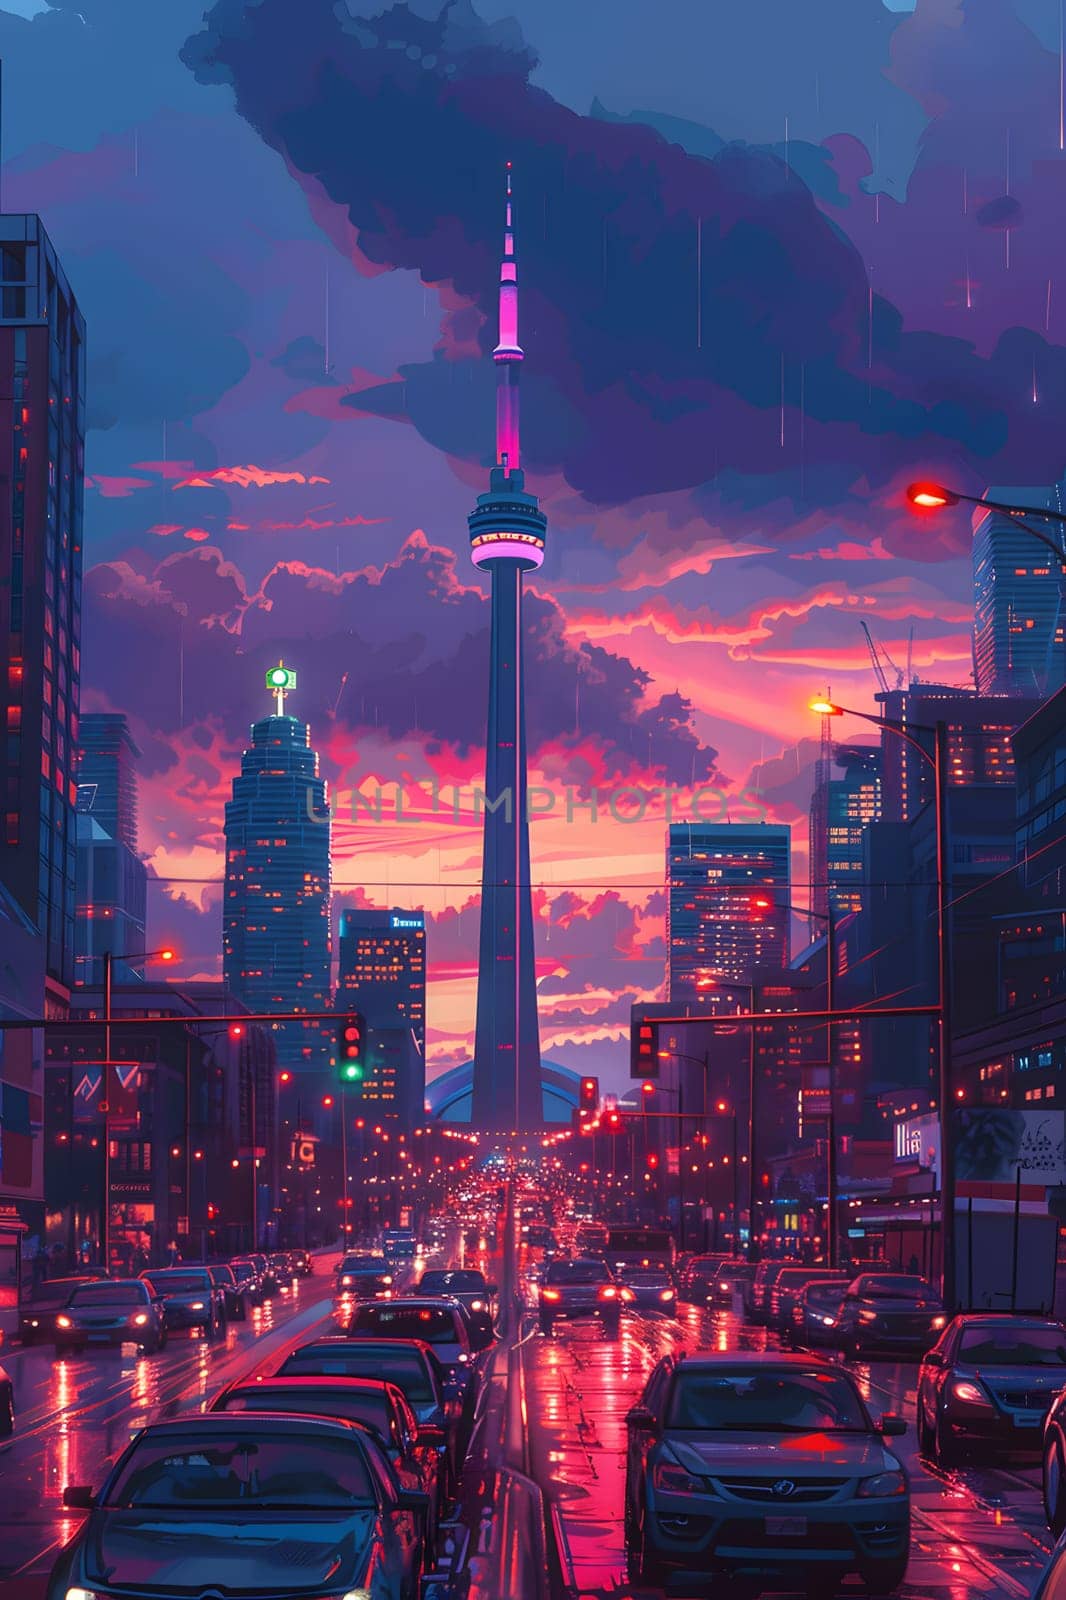 A city street painting at dusk with a skyscraper tower in the background under a red sky afterglow, with clouds and buildings in the sky